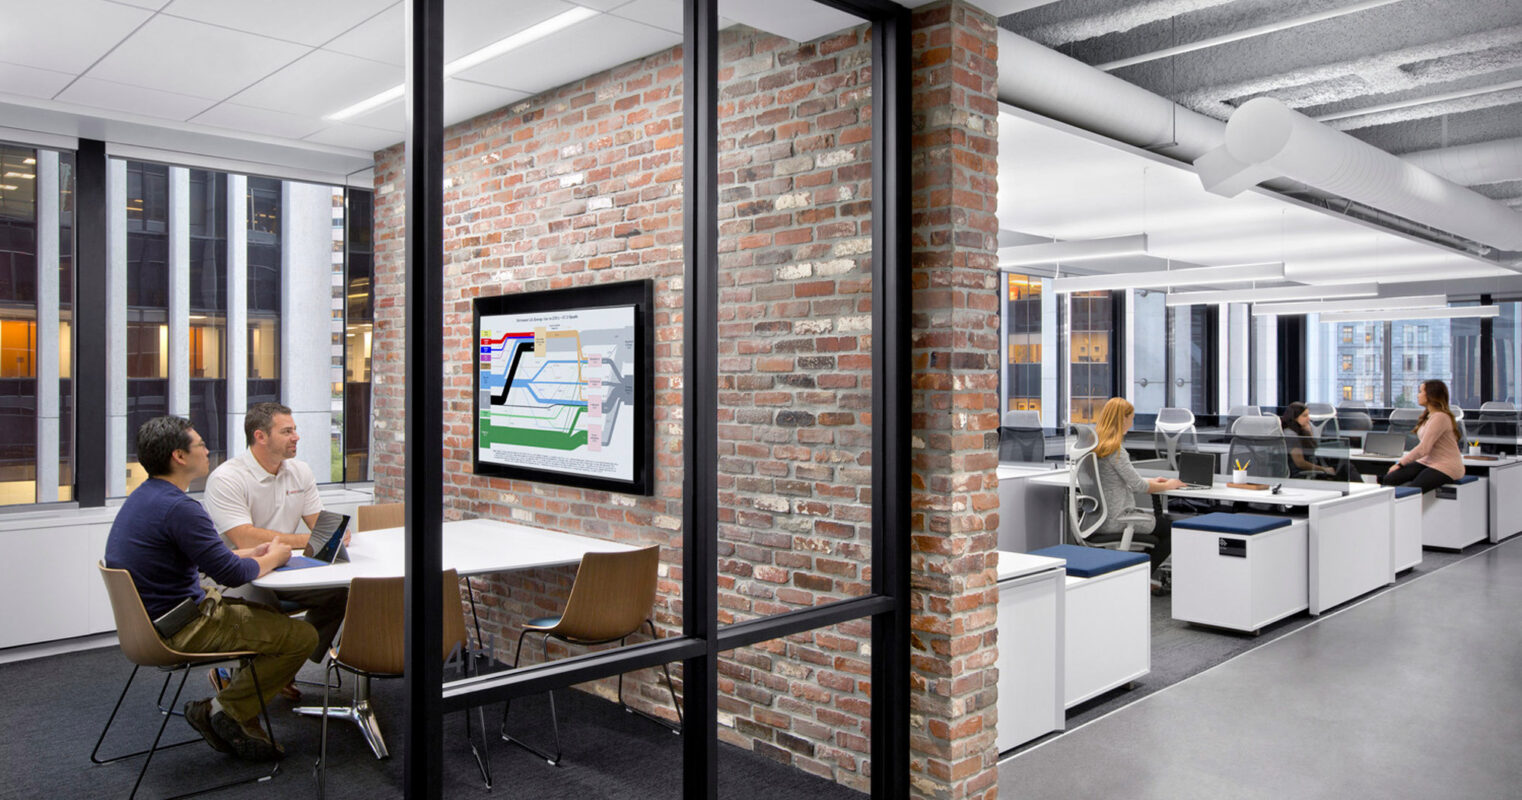 Modern open-plan office with exposed brick walls, incorporating a balance of natural and industrial design elements. Individuals collaborate at a communal table, while others work at standing desks against a backdrop of floor-to-ceiling windows with urban views.